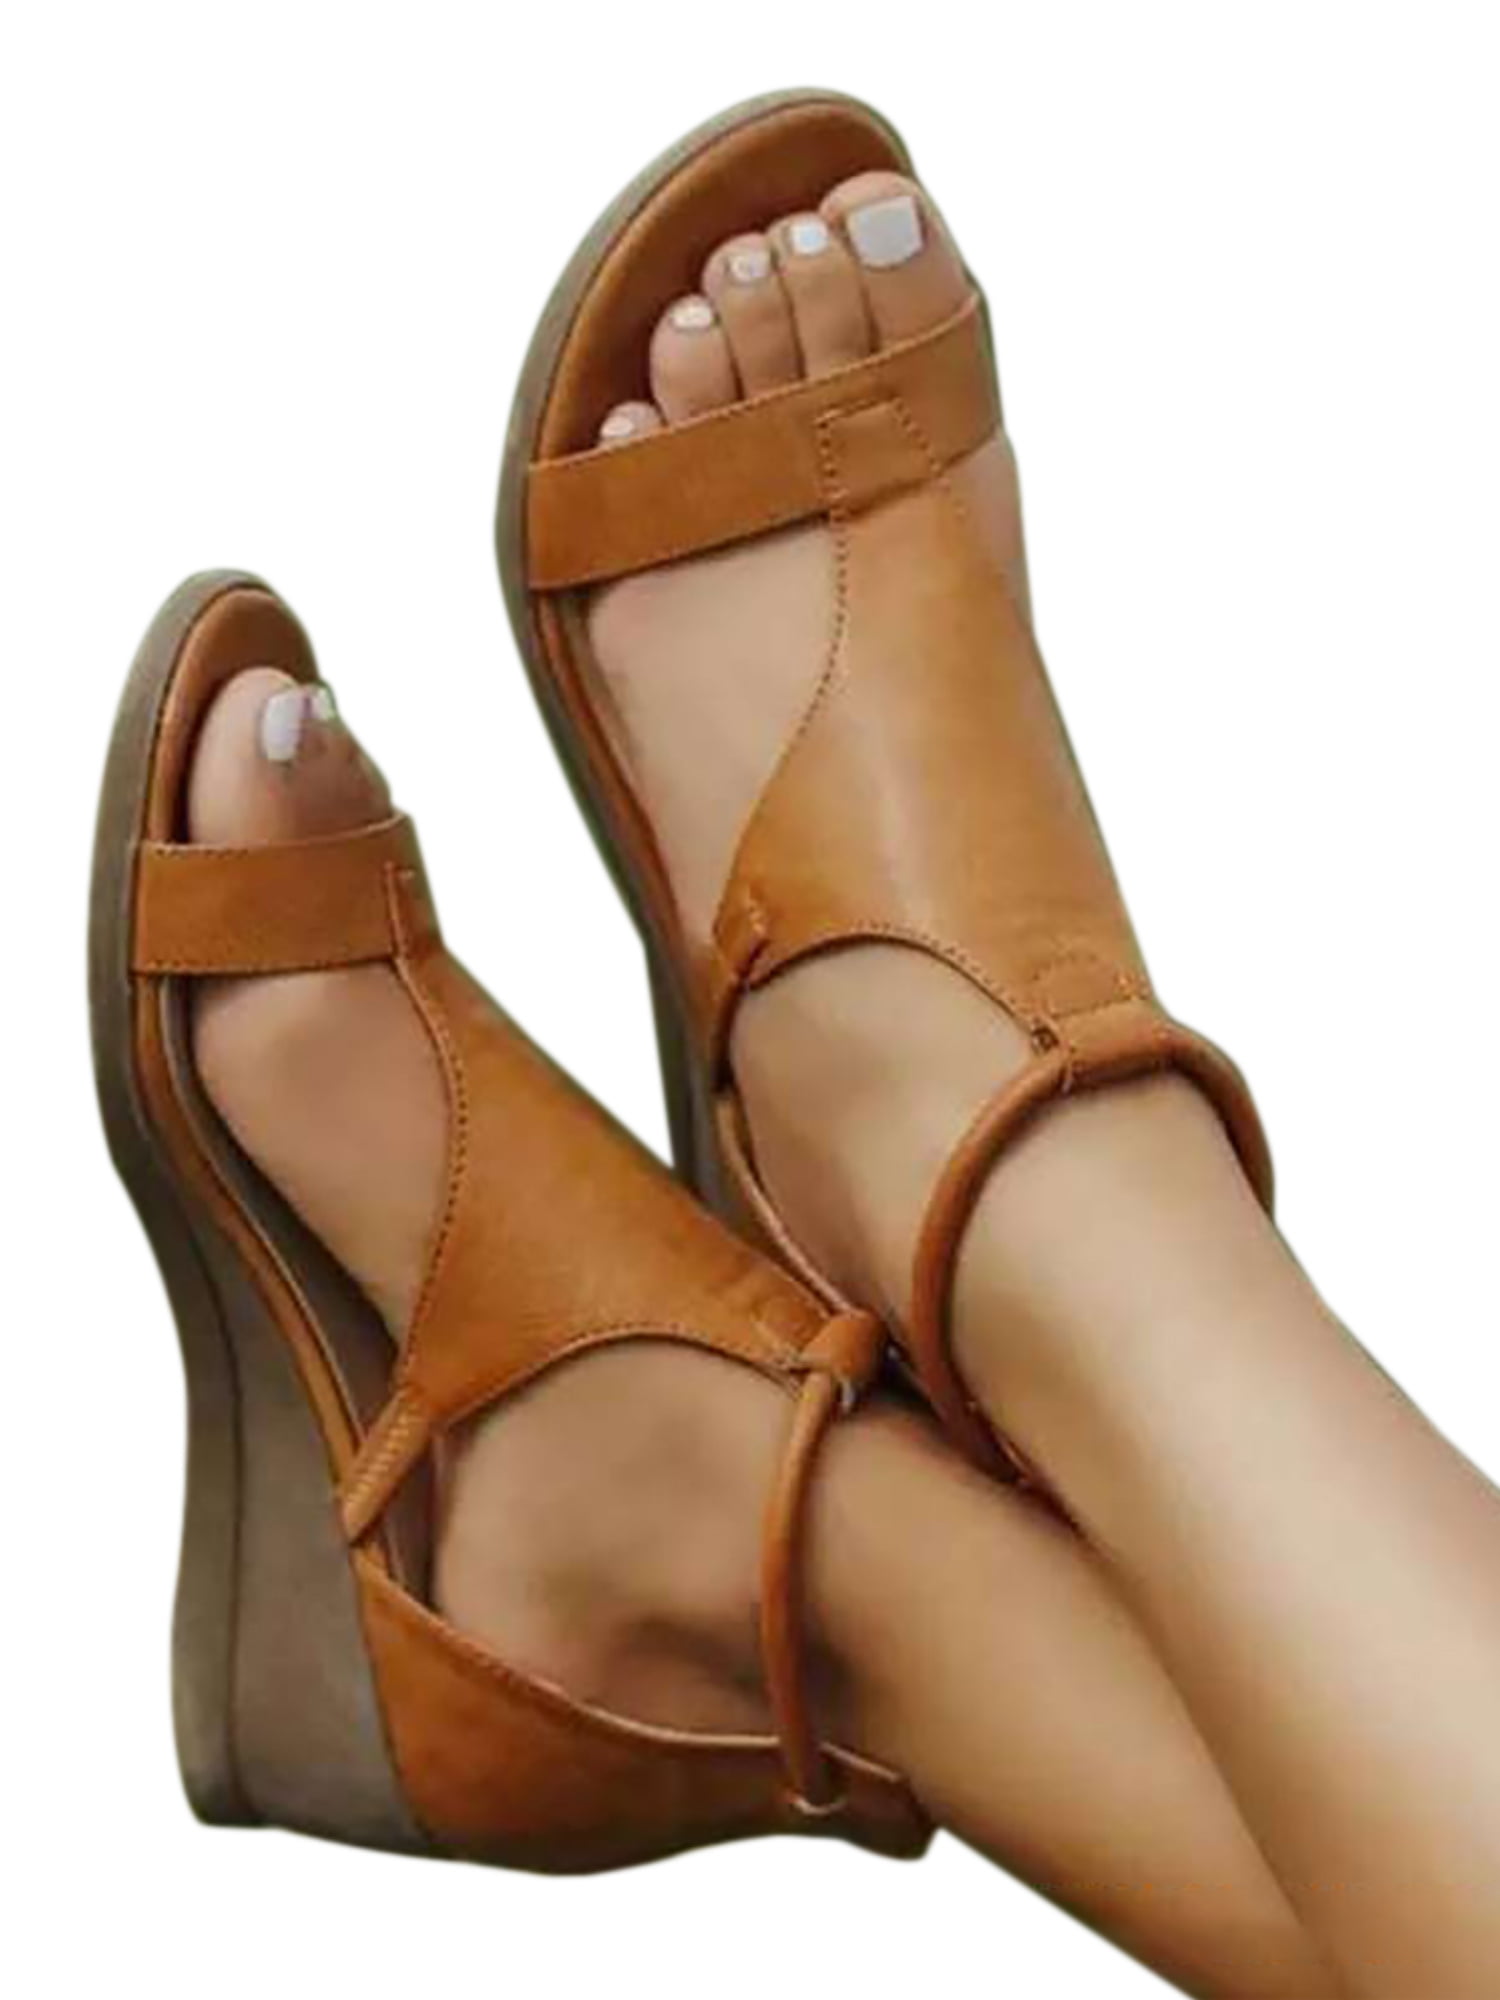 Womens Faux Leather Sandals Criss-Cross Open Toe Elastic Strap Summer Shoes Casual Soft Platform Wedge Shoes